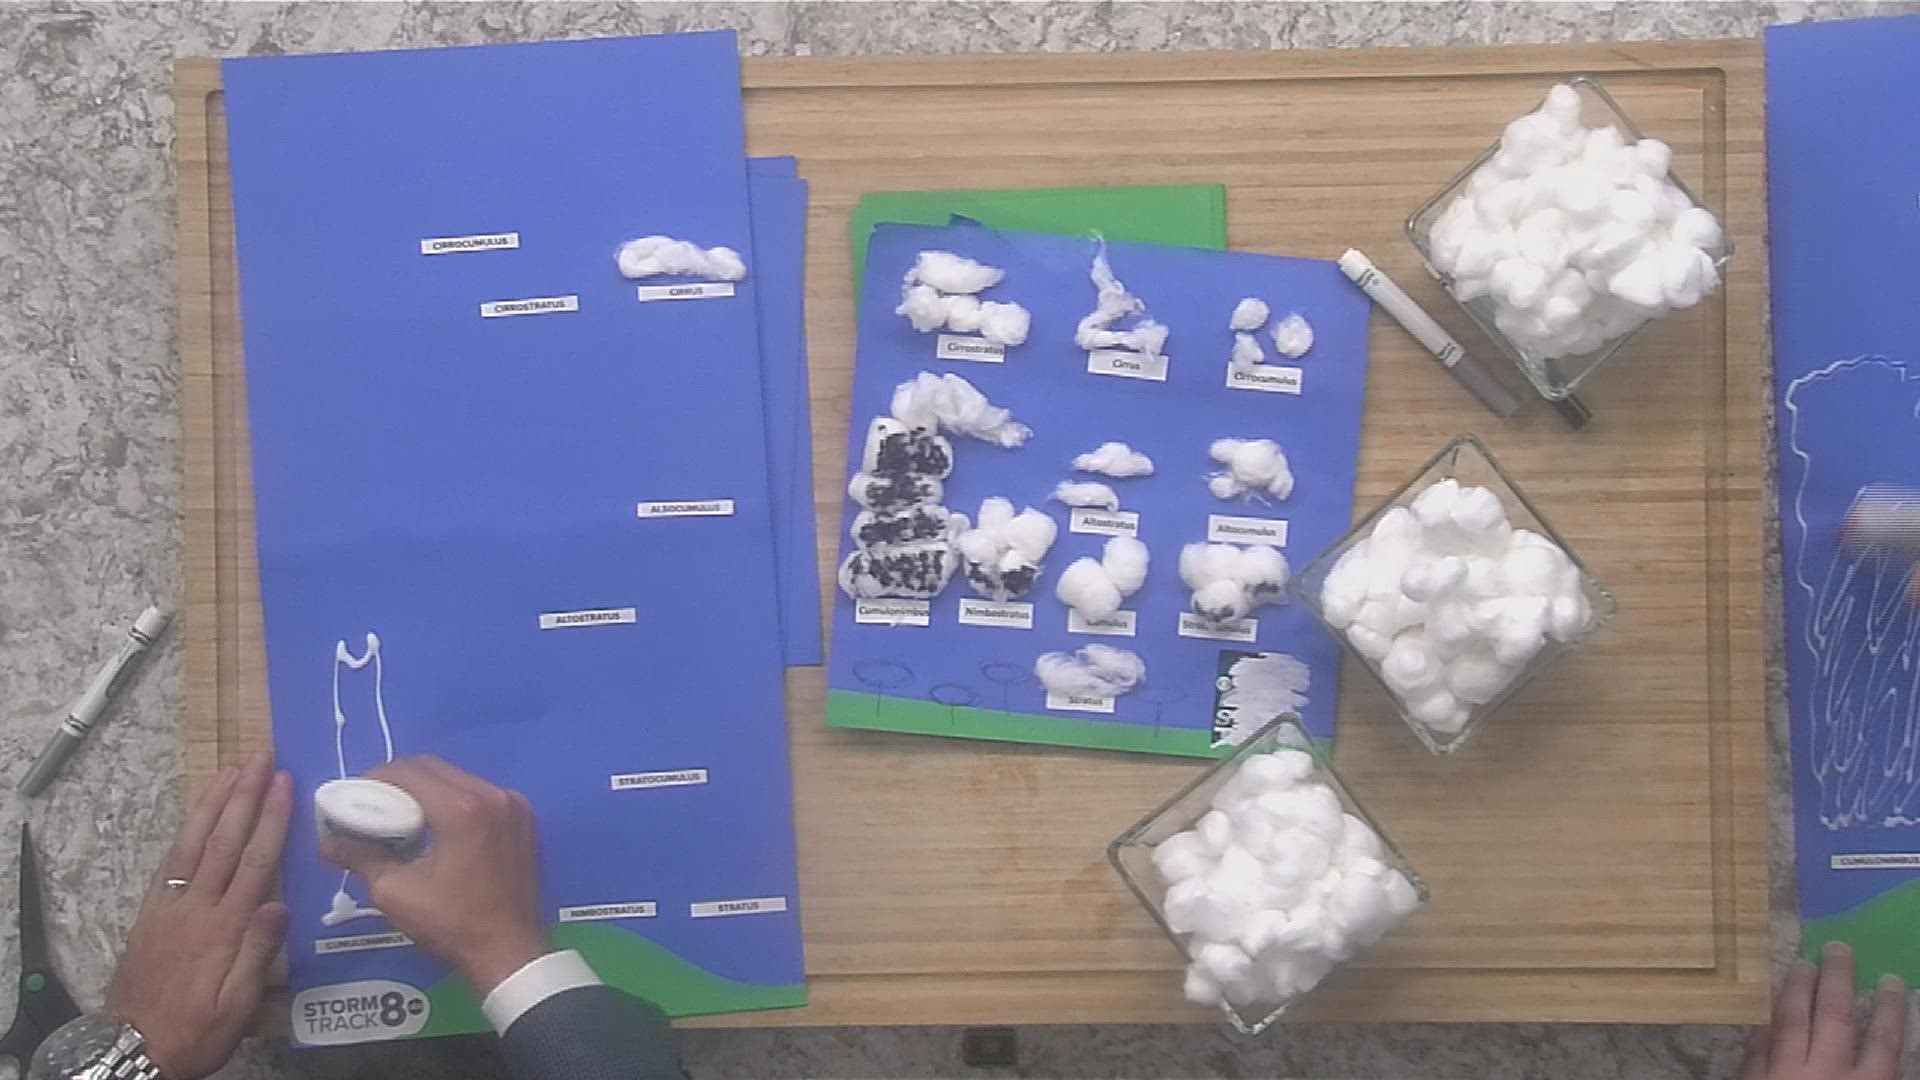 We create our very own StormTrack 8 cloud chart using construction paper and cotton balls.